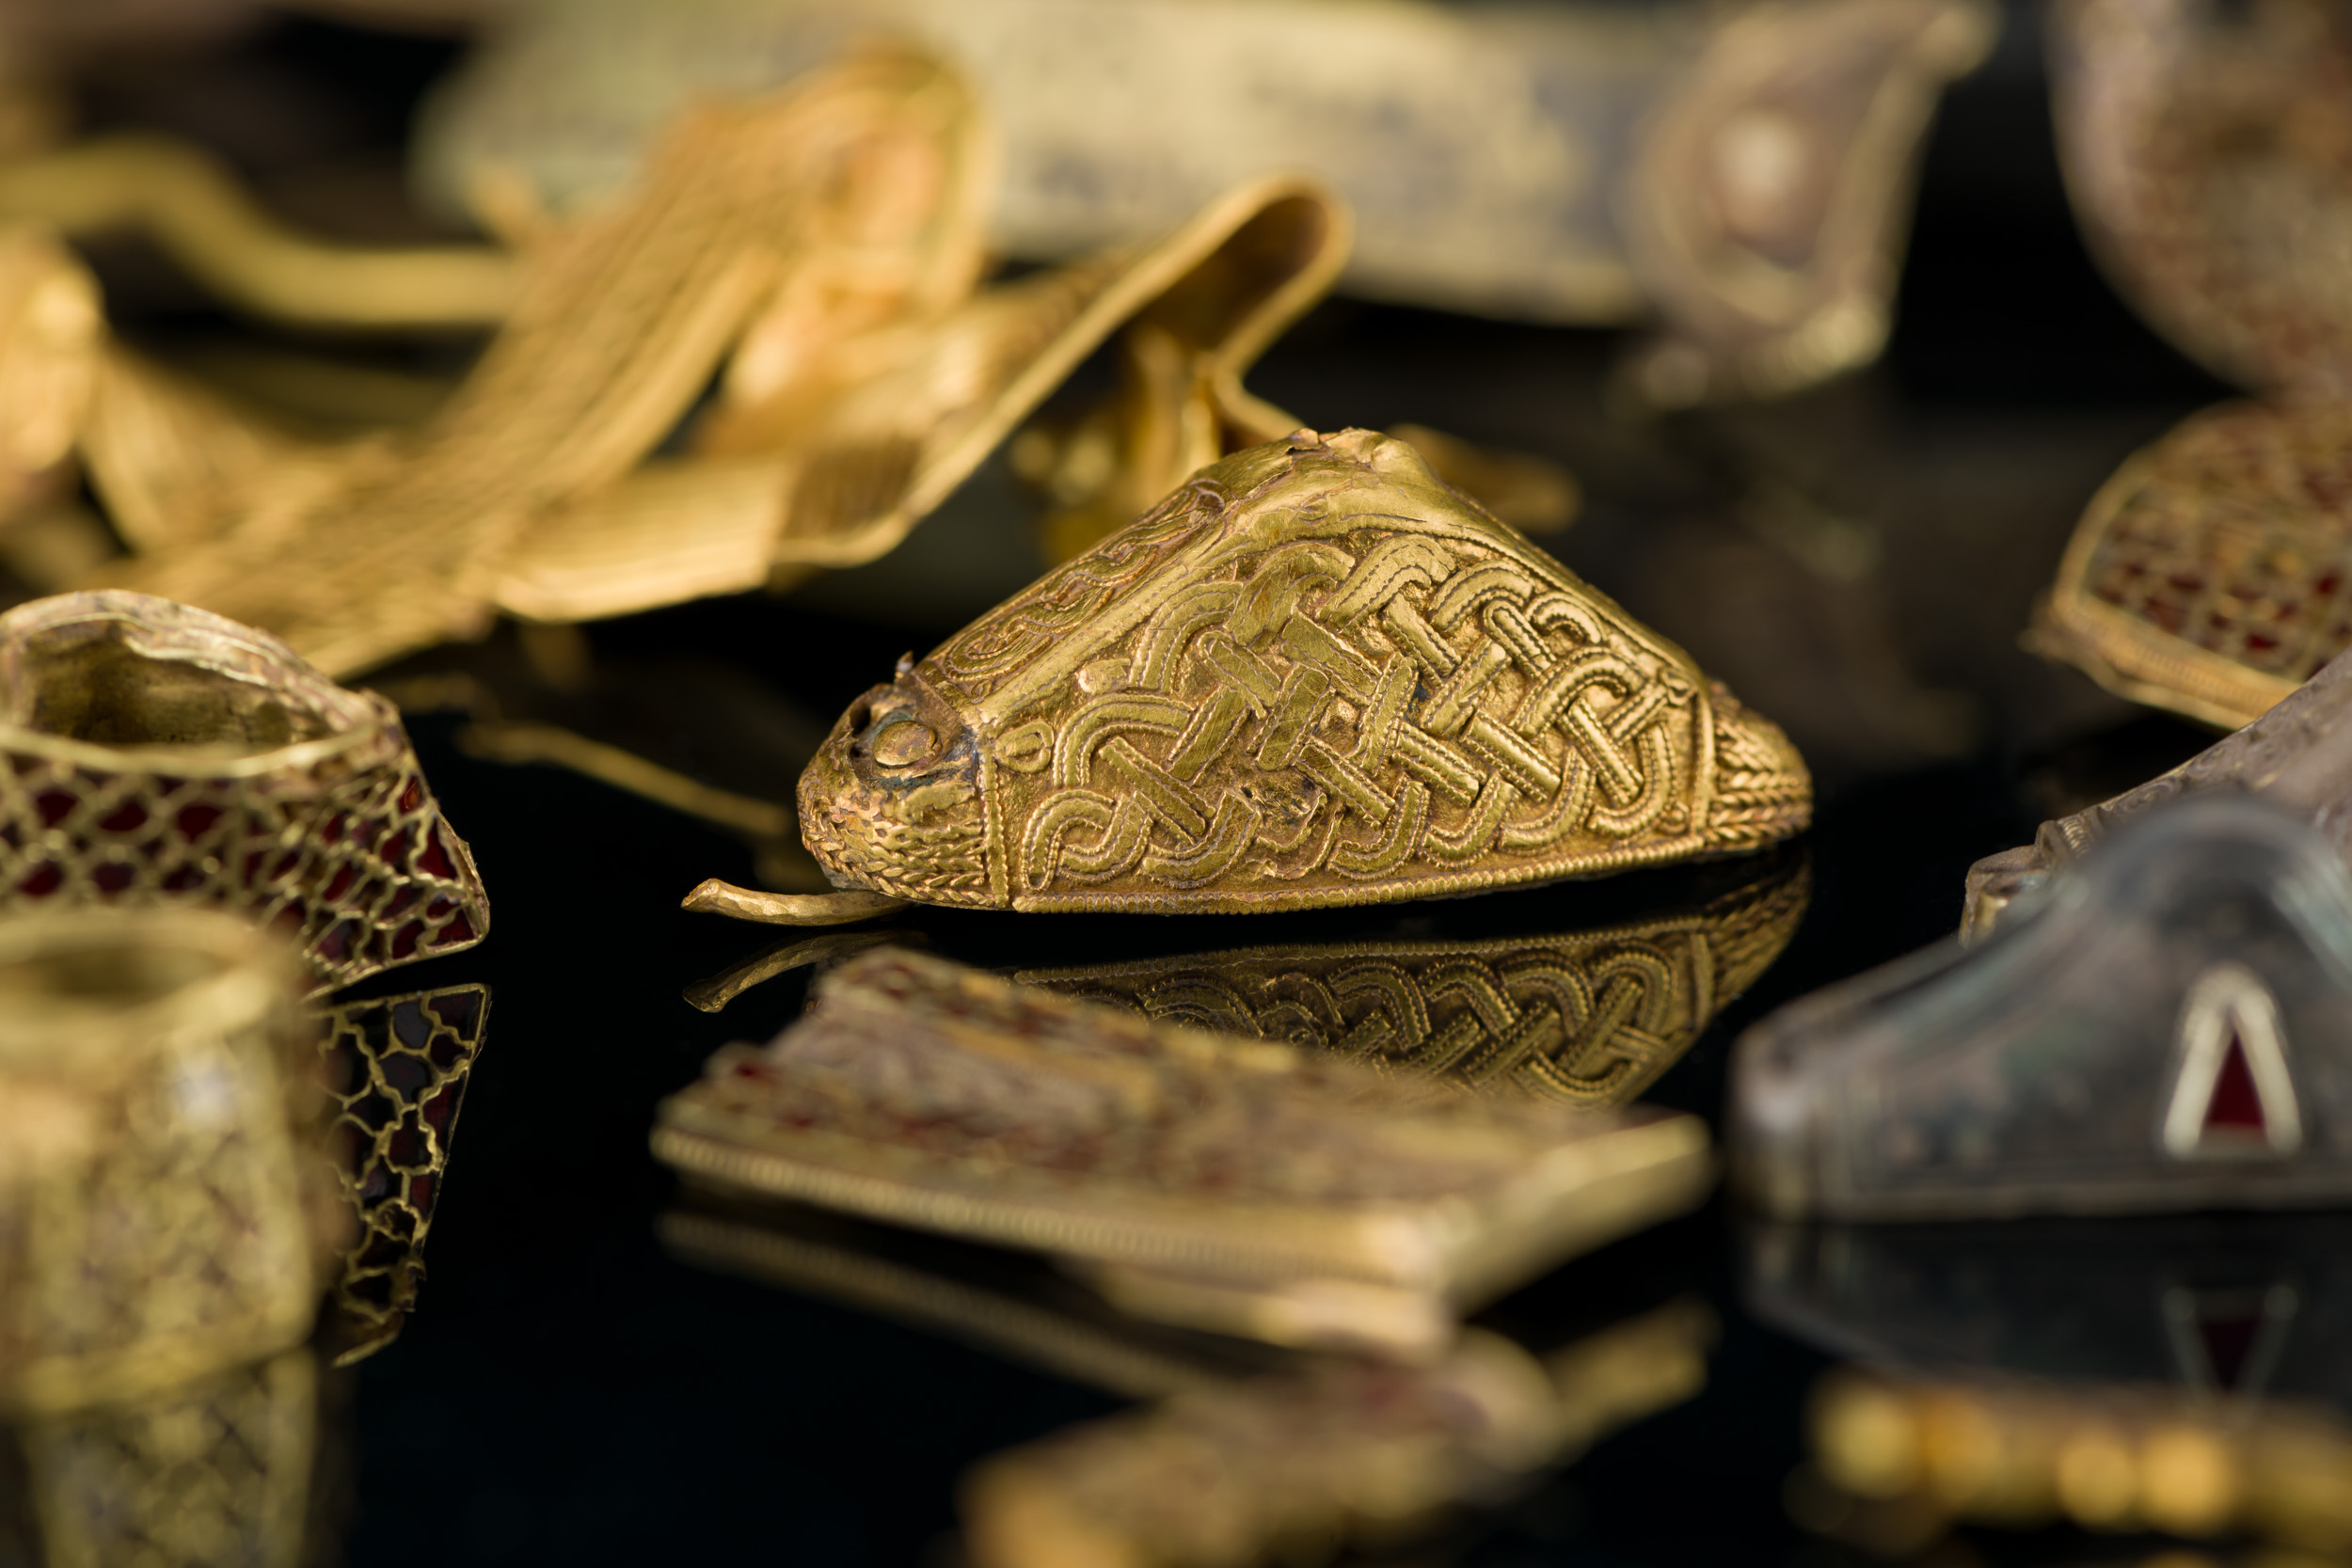 Detail of a group of decorated gold objects.